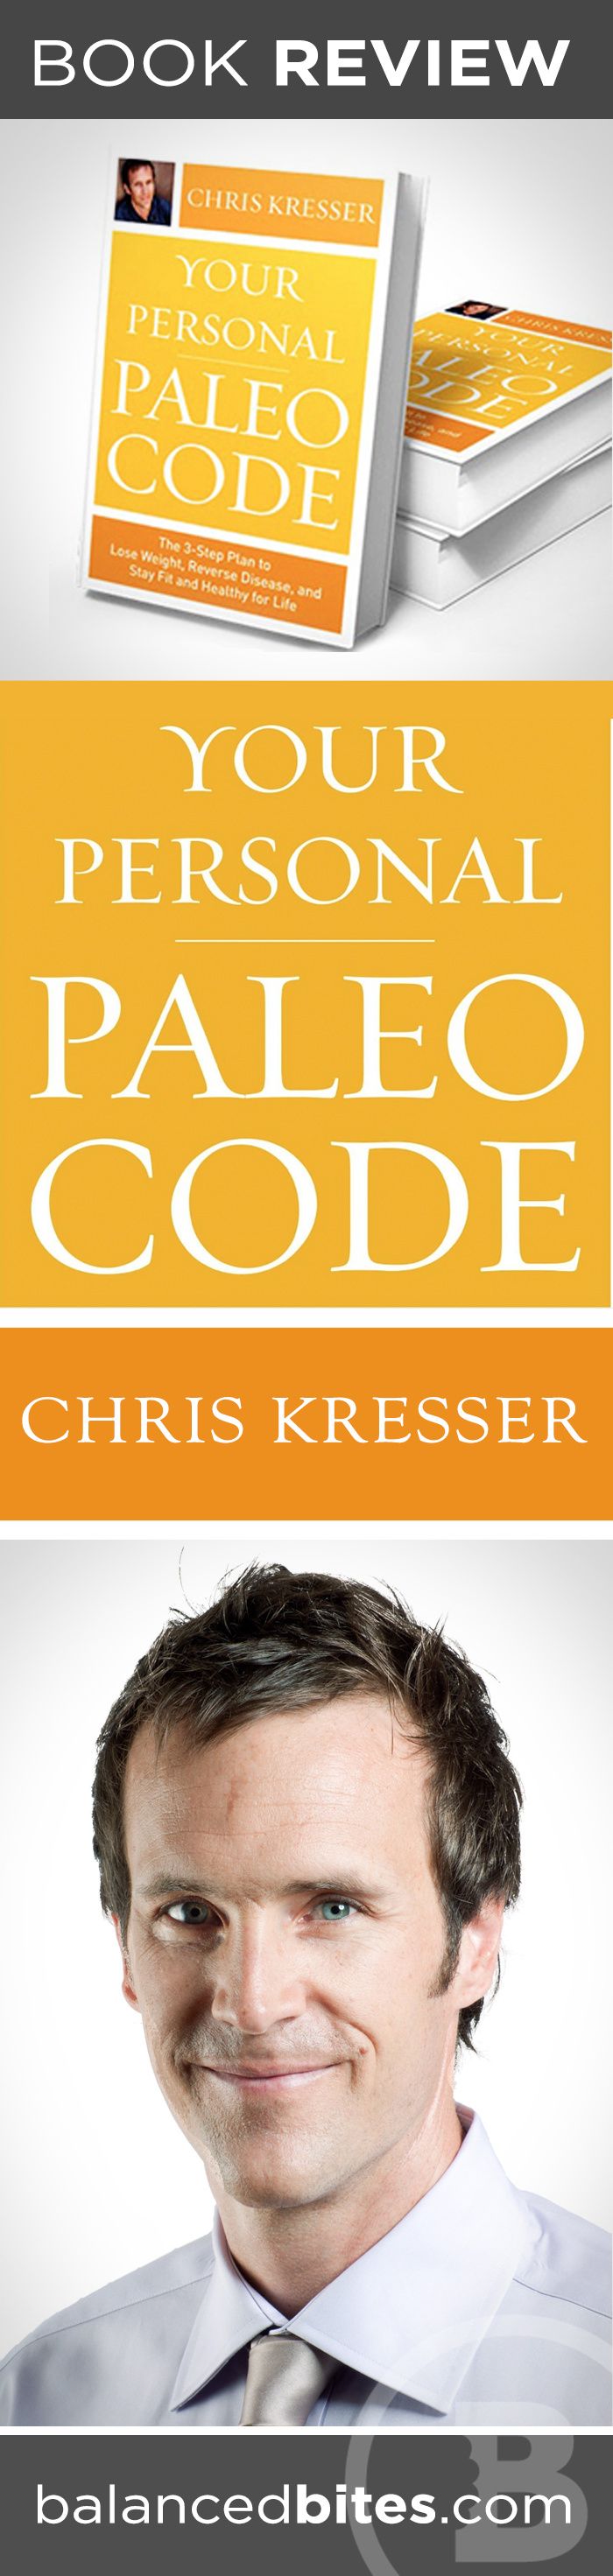 Balanced Bites Book Review | Your Personal Paleo Code by Chris Kresser